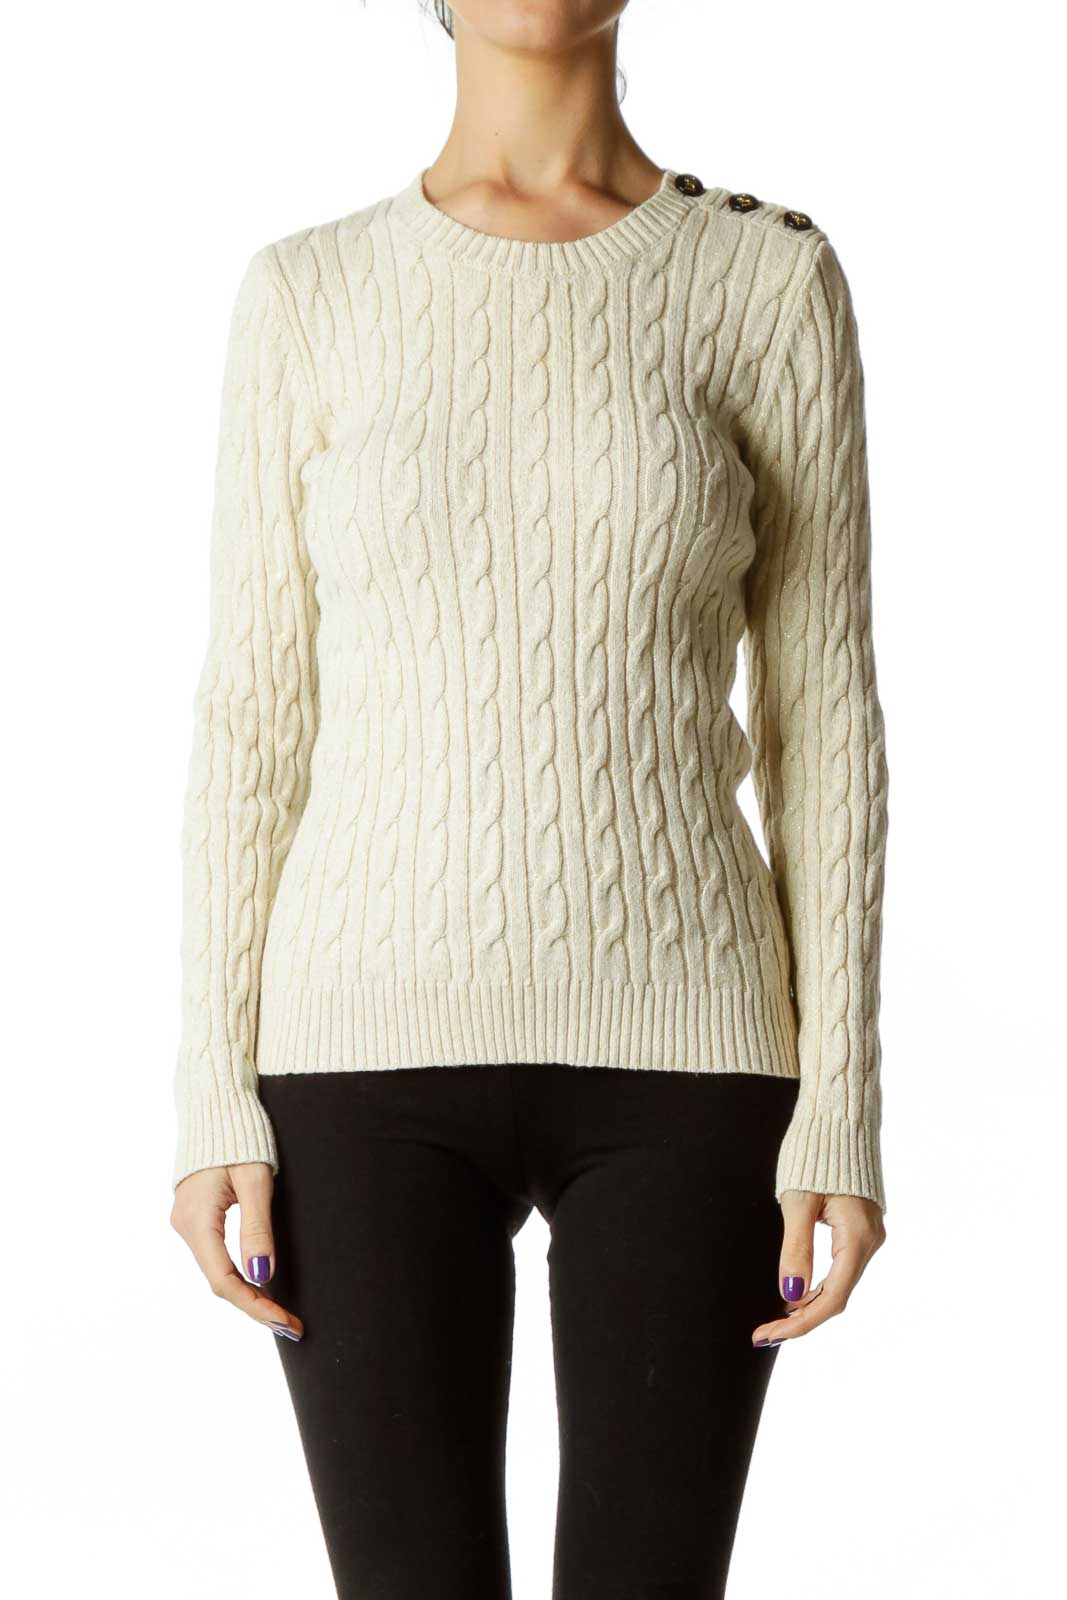 Beige Metallic Cable Knit Sweater Front